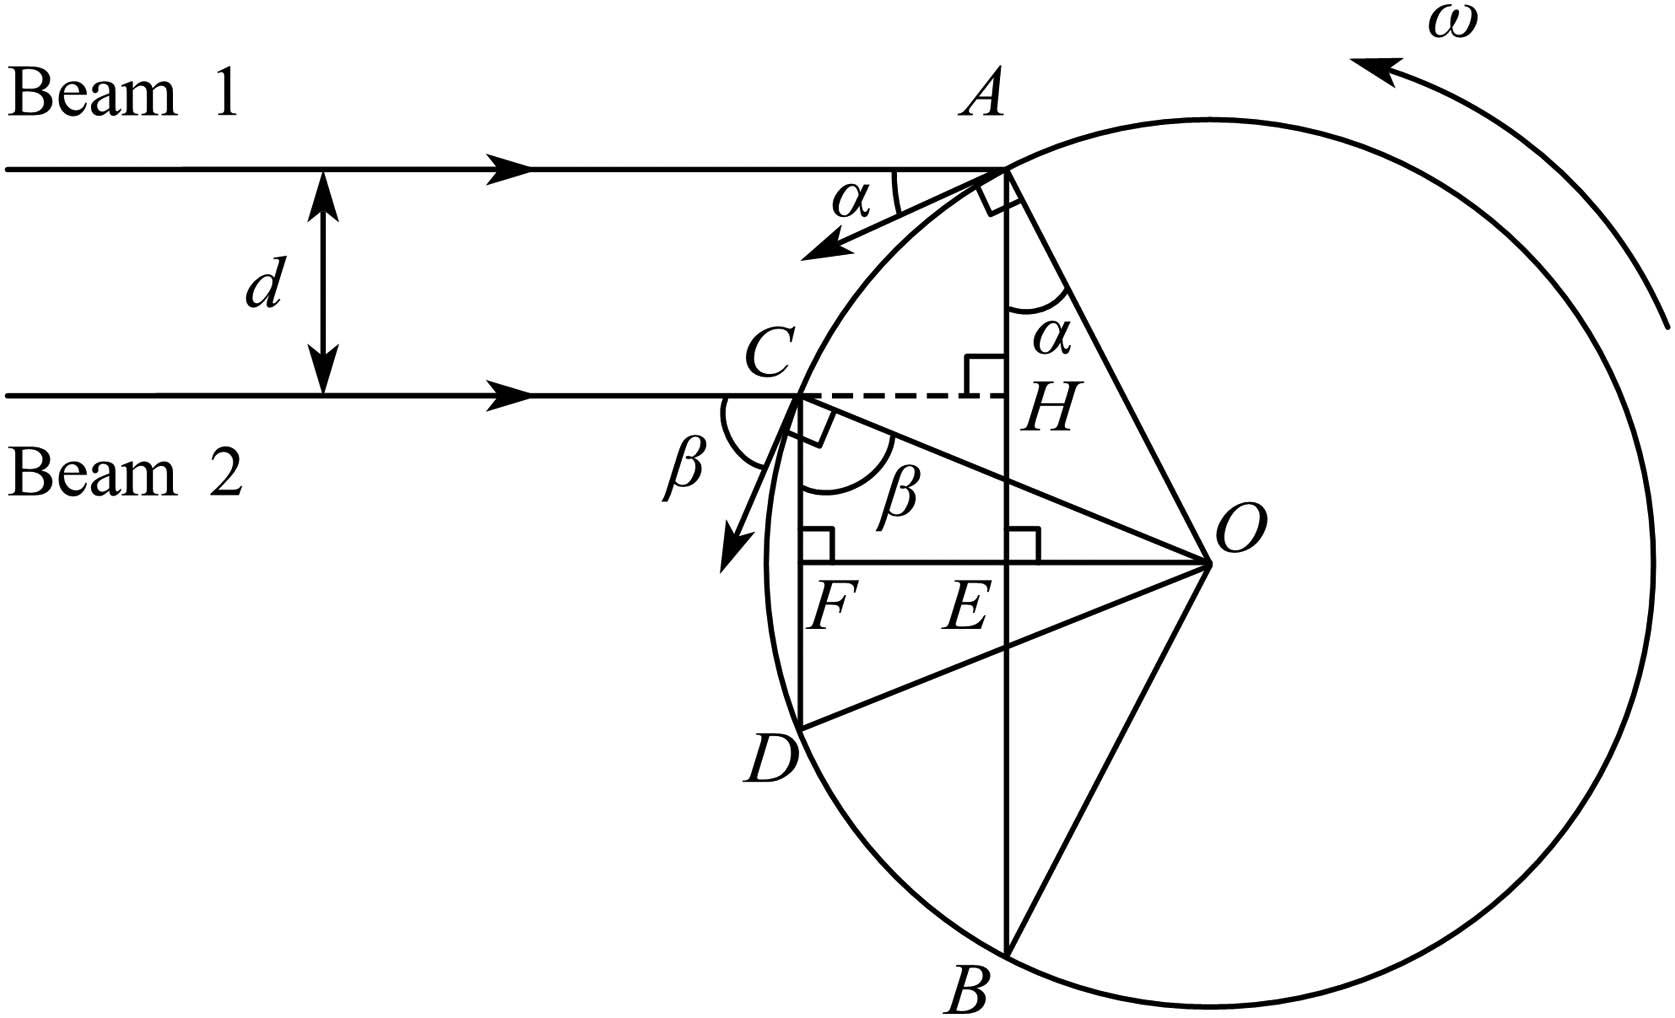 Geometric relationships of the two beams and the measured rotating body.